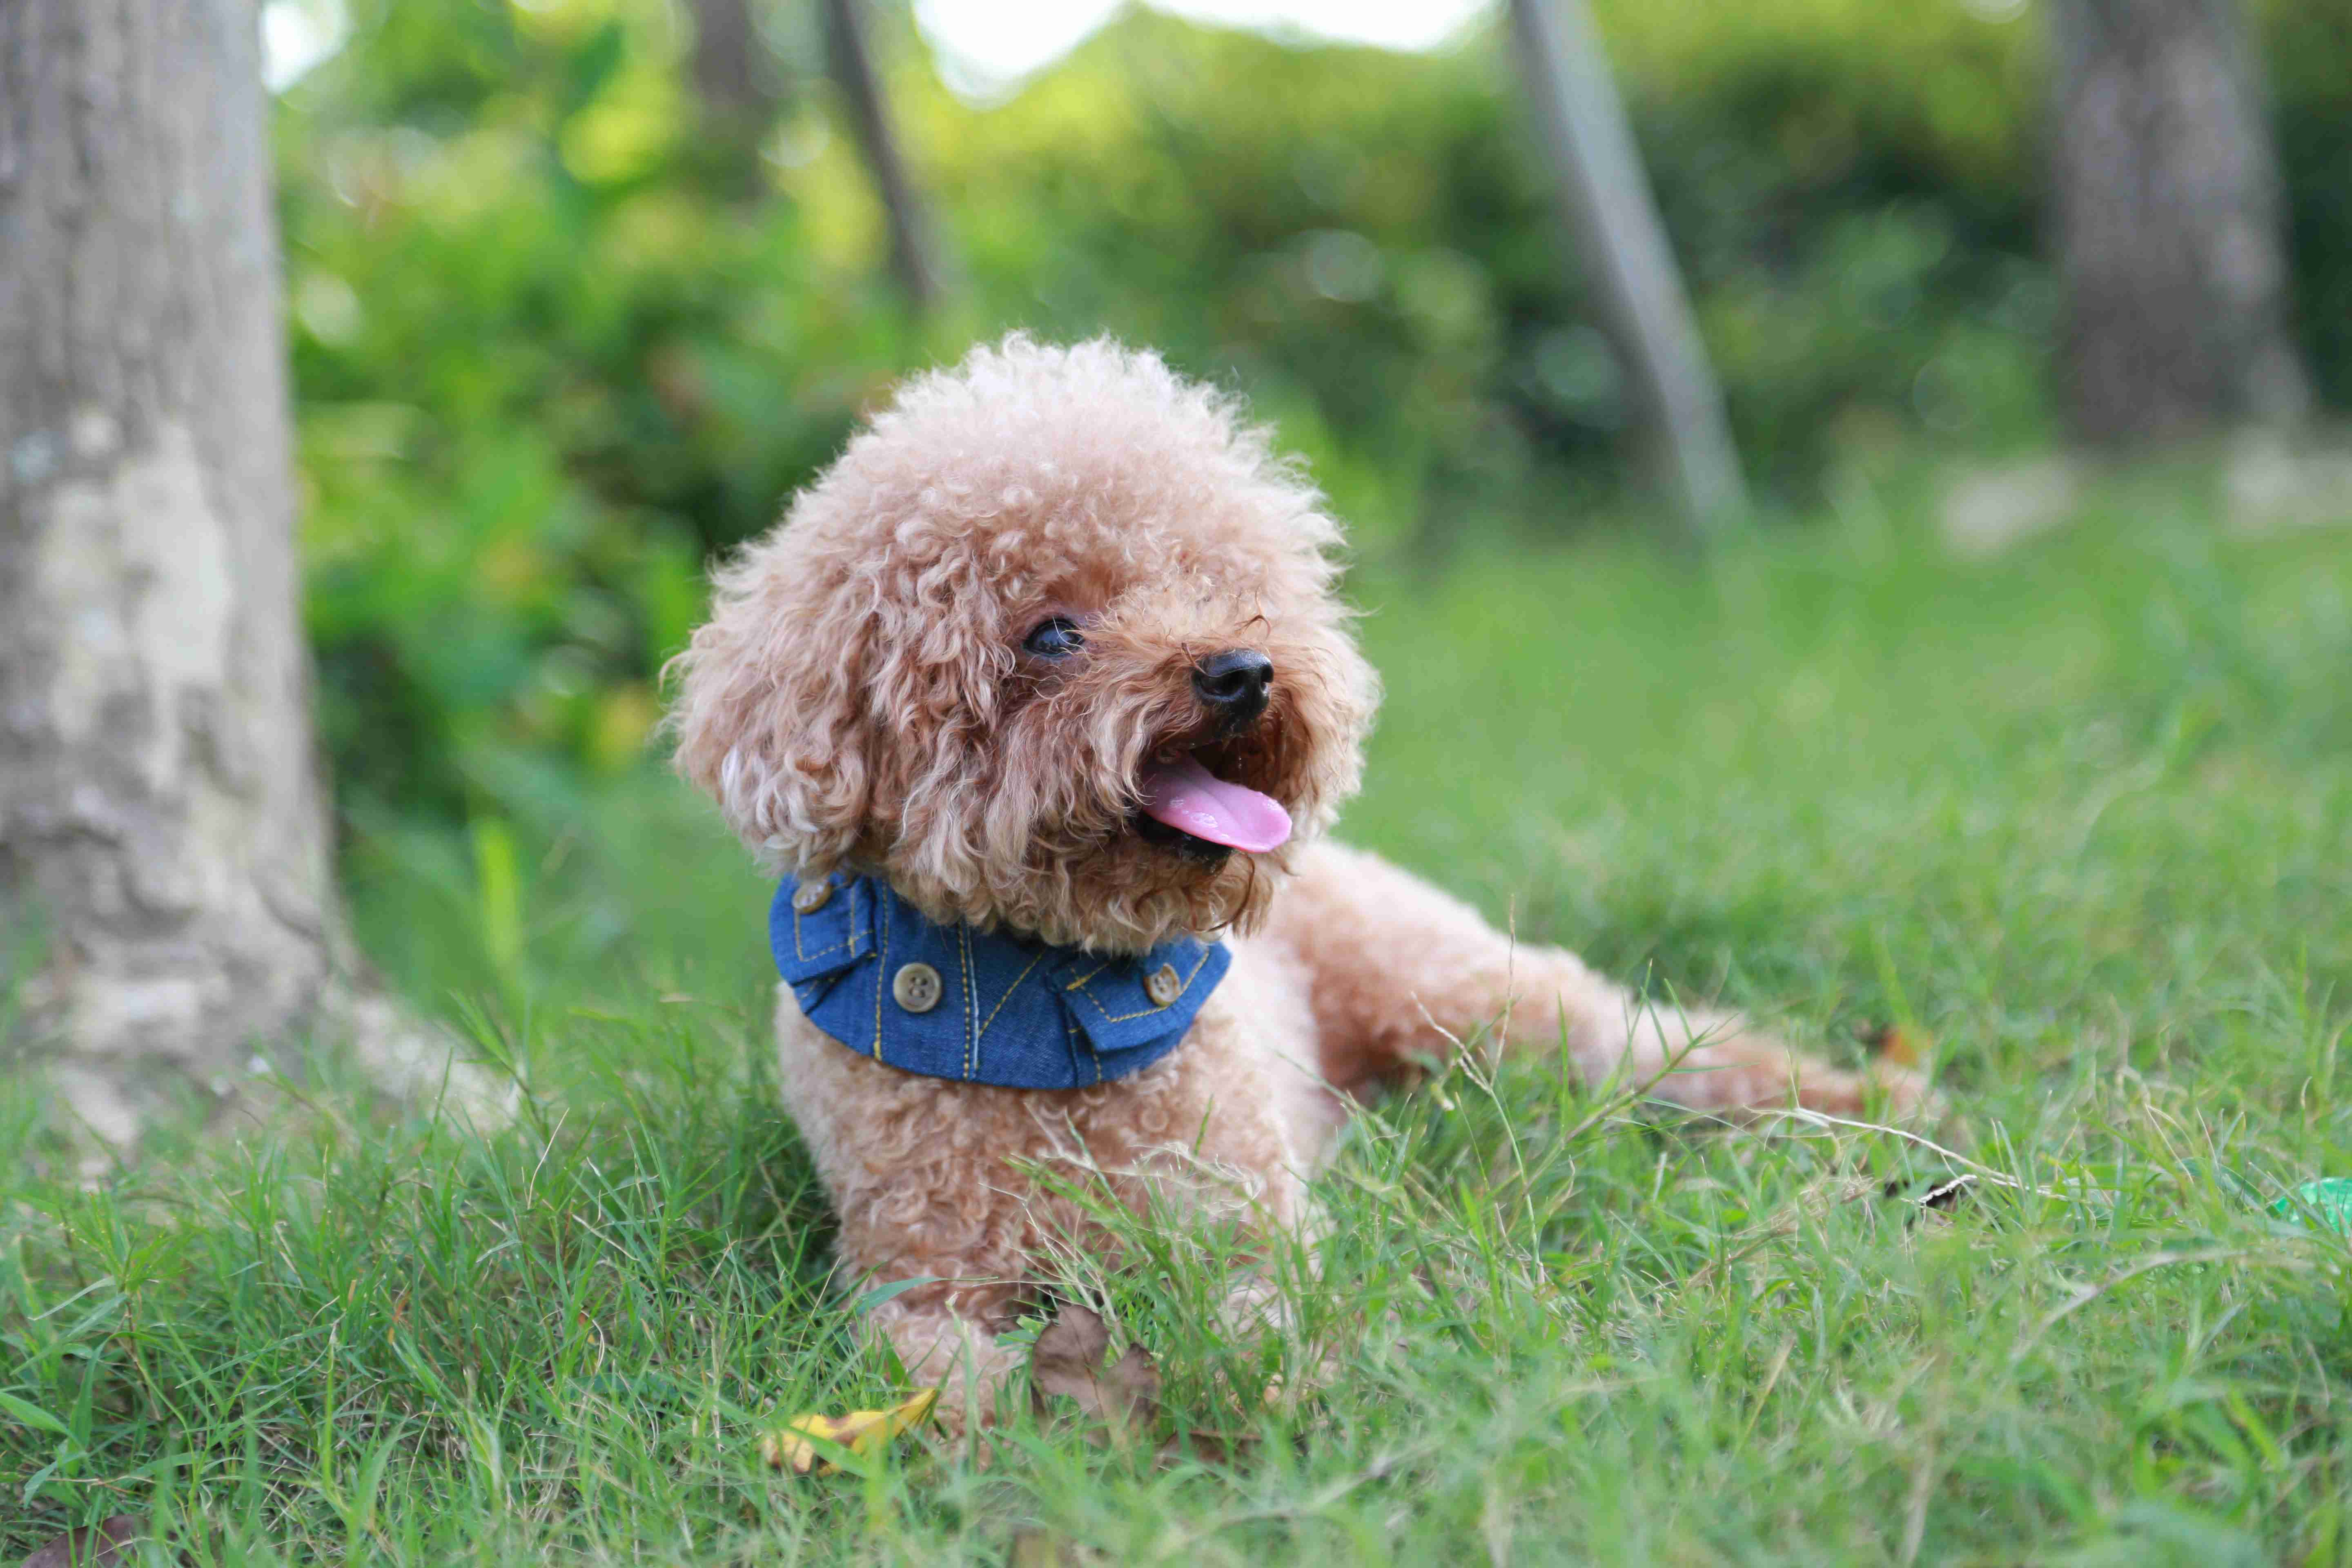 How did you gradually introduce your Poodle puppy to being left alone for longer periods?